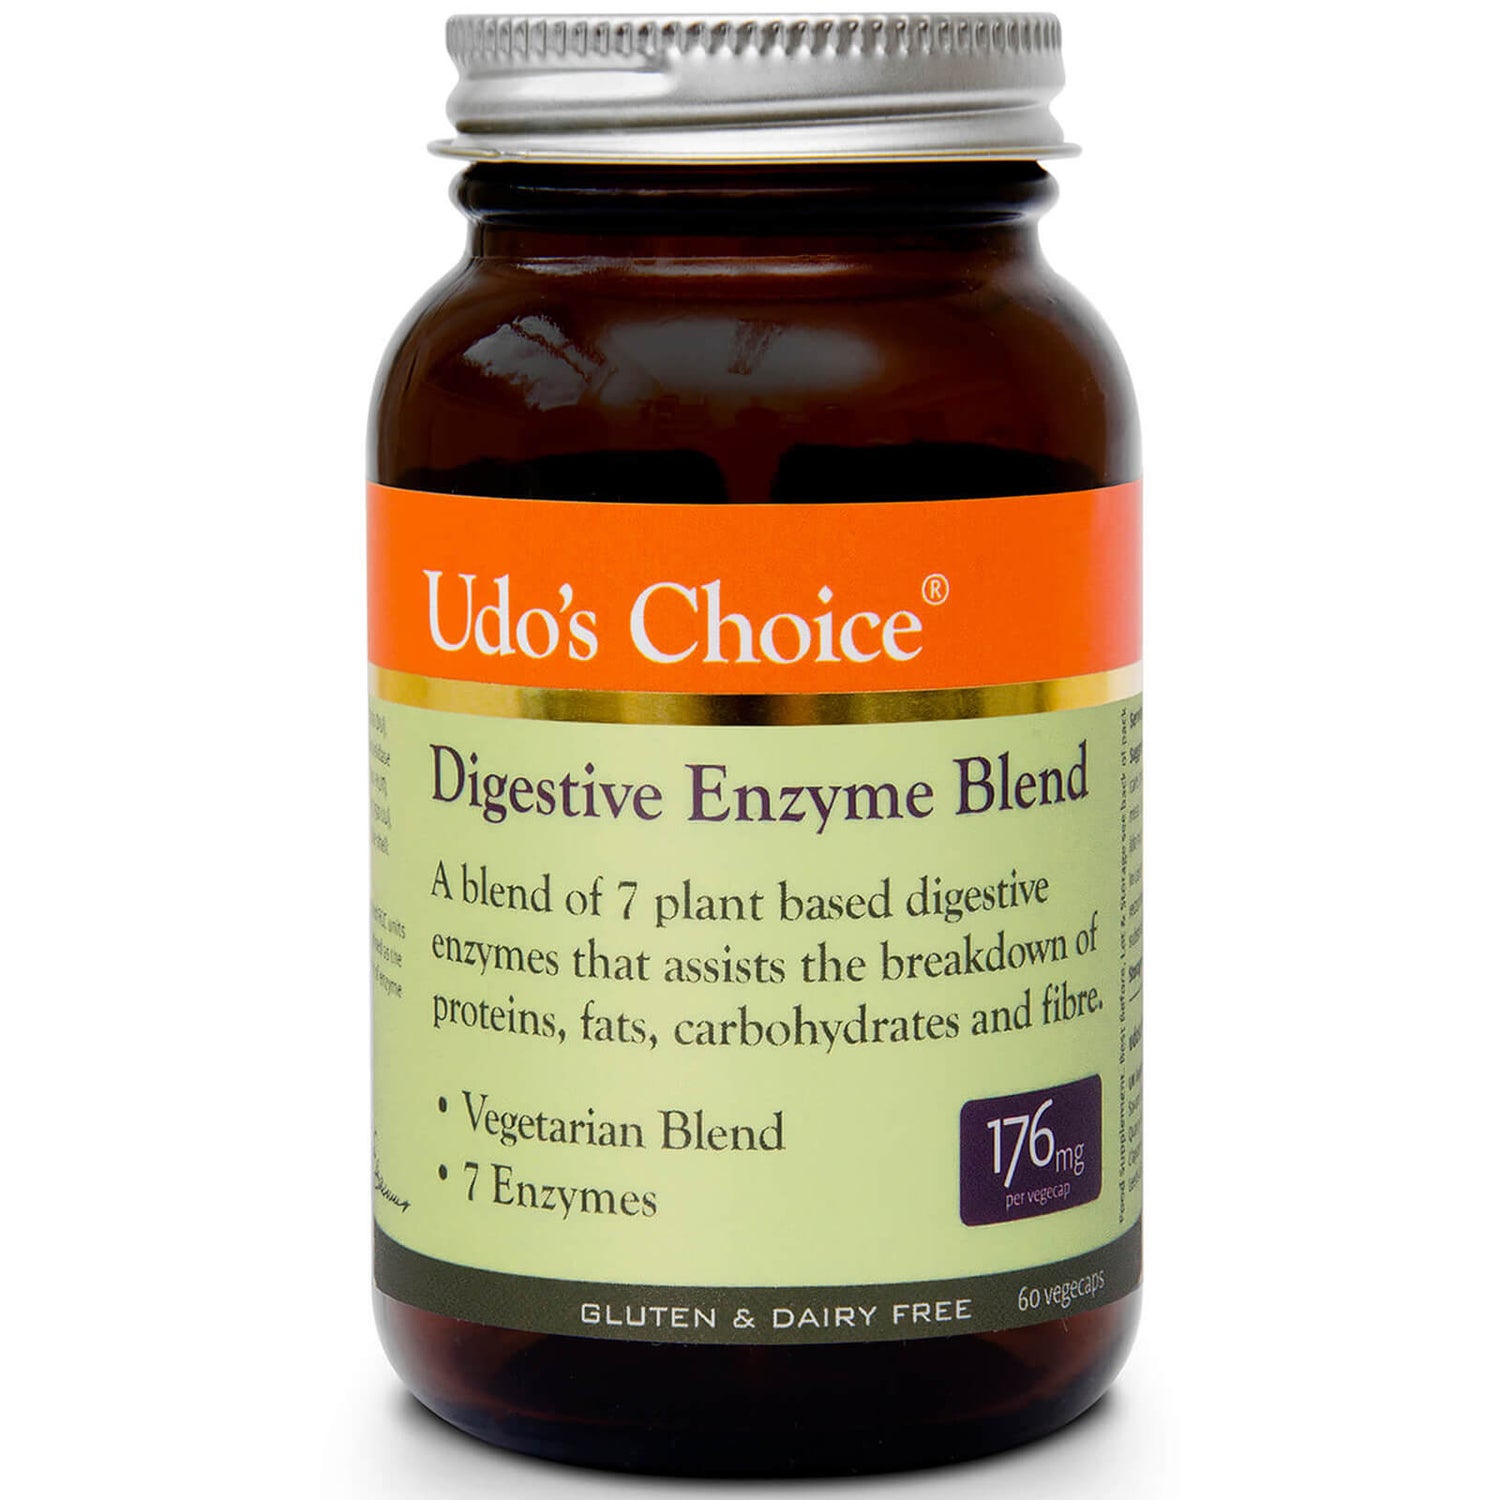 Udo's Choice Digestive Enzyme Blend